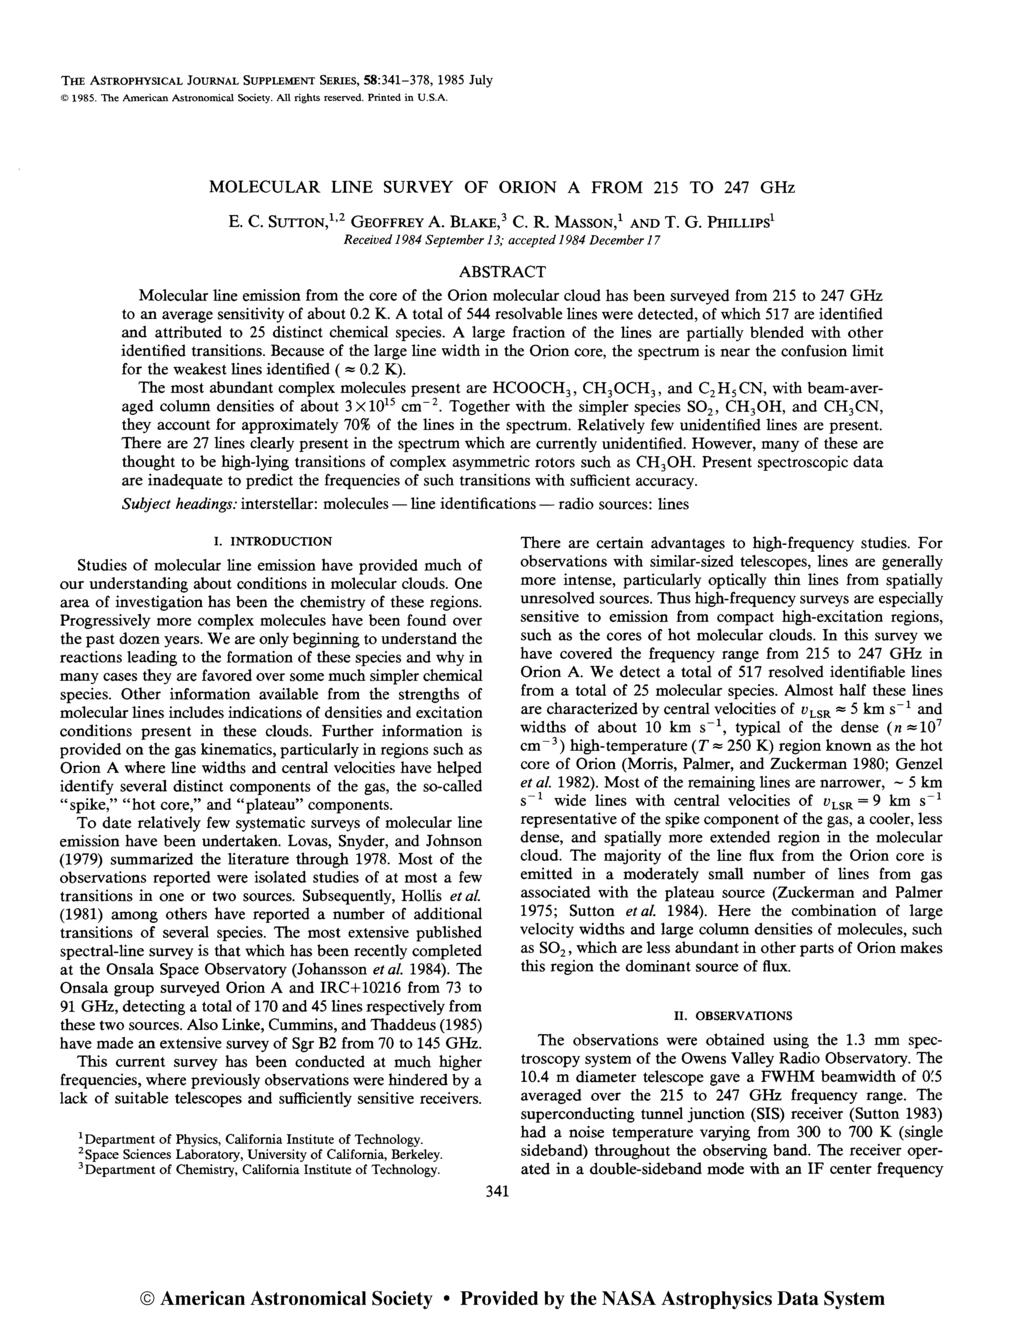 THE ASTROPHYSCAL JOURNAL SUPPLEMENT SERES, 58:341-378, 1985 July 1985. The American Astronomical Society. All rights reserved. Printed in U.S.A. MOLECULAR LNE SURVEY OF ORON A FROM 215 TO 247 GHz E.